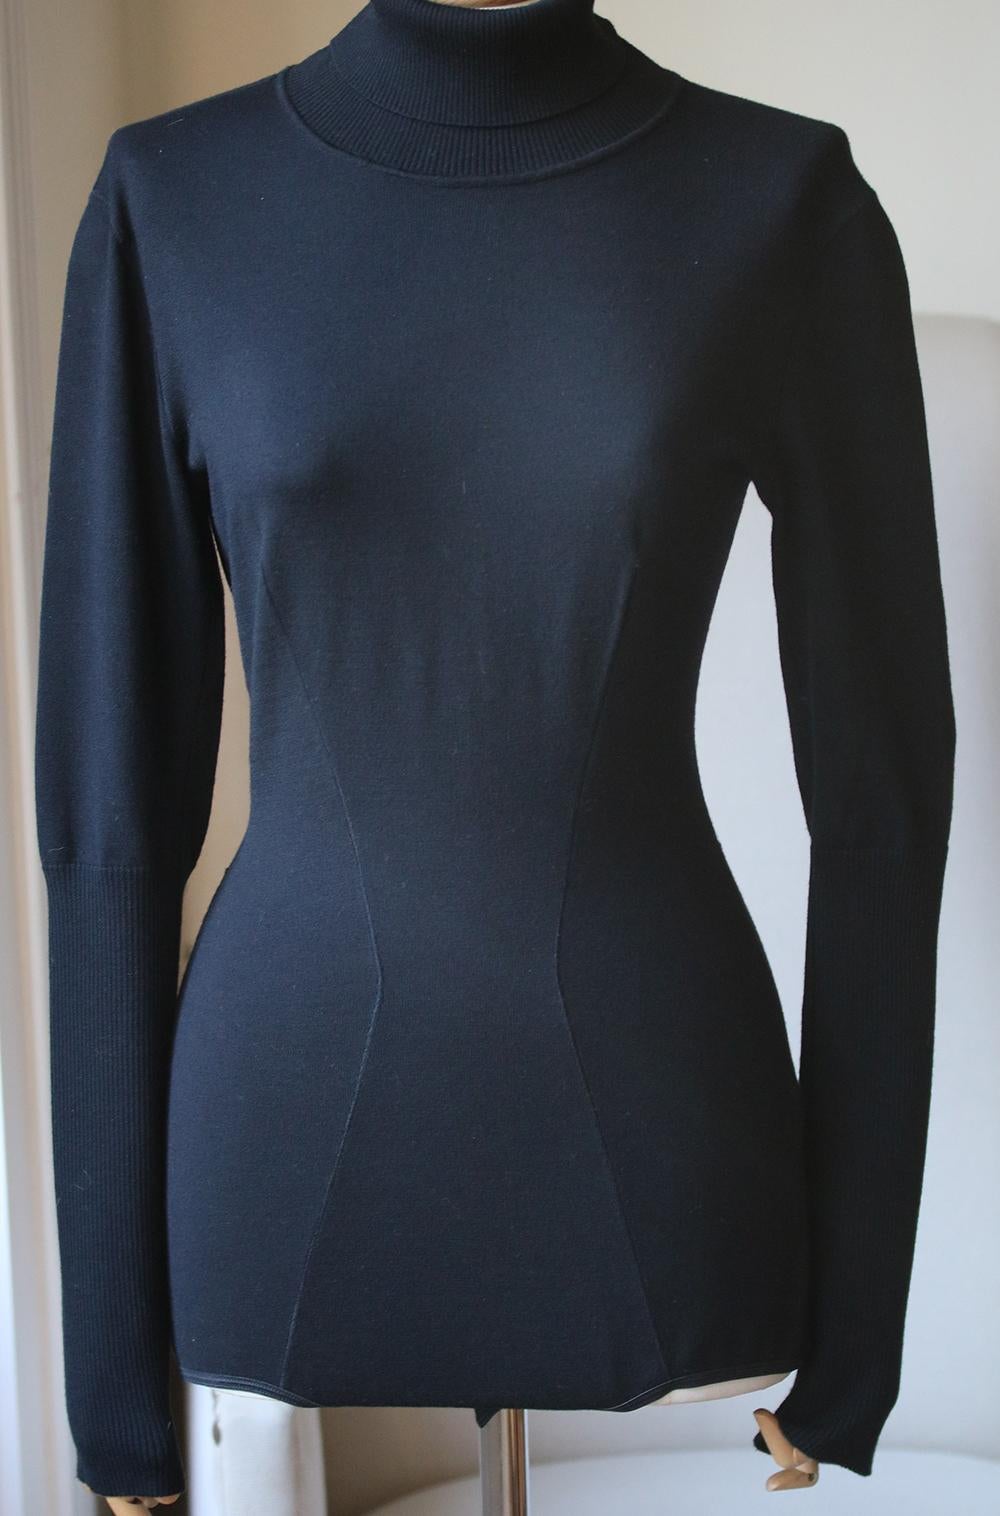 Bodysuits make a whole outfit look so sleek and elegantly pulled together. Cut with a full covered base, this Alaïa style works as well with something tight-fitting as it does with a looser, more fluid skirt as seen here. It's spun from beautifully